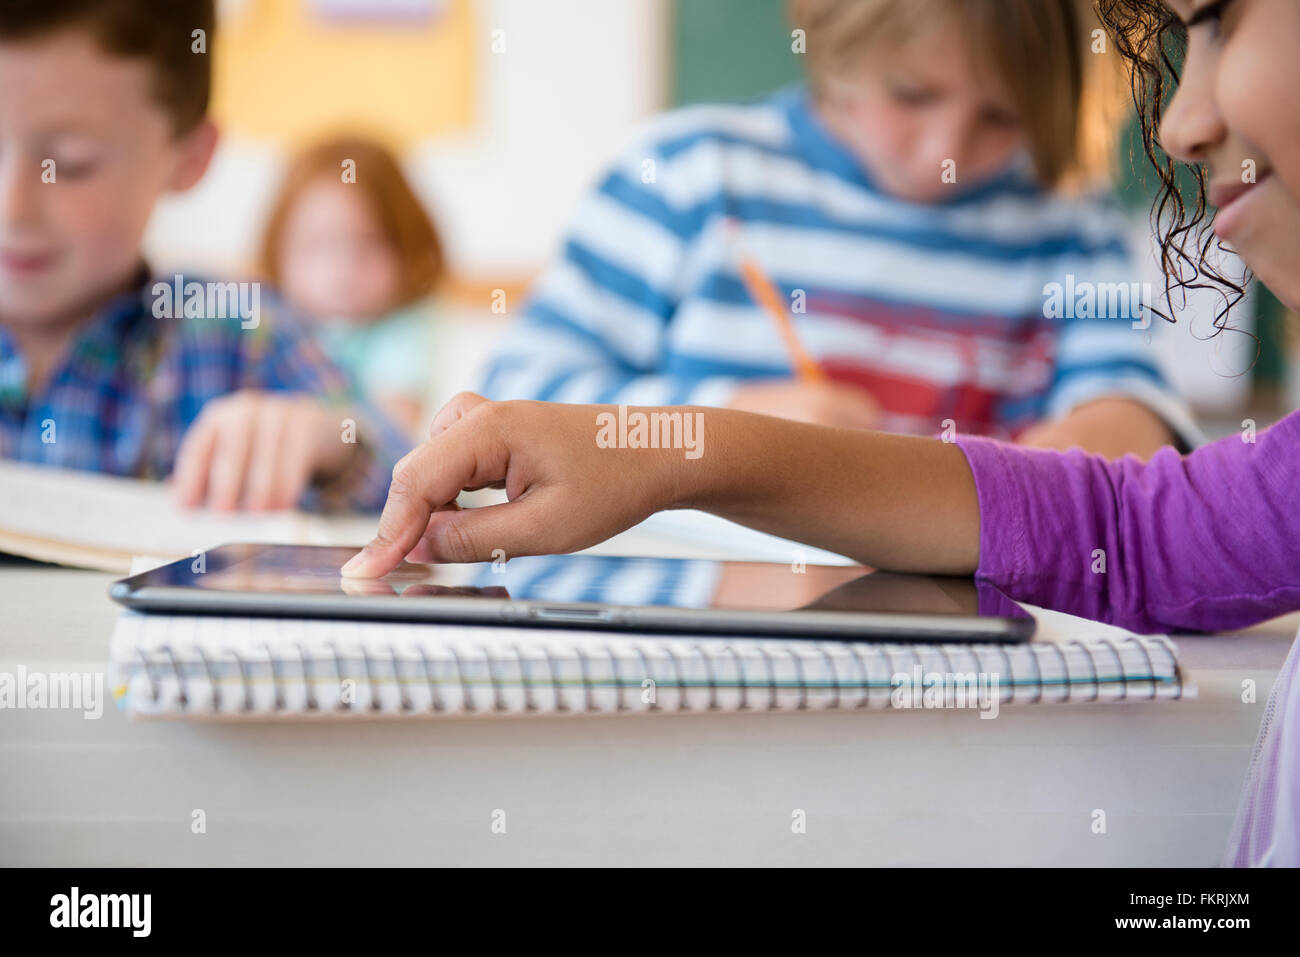 Student using digital tablet in classroom Stock Photo